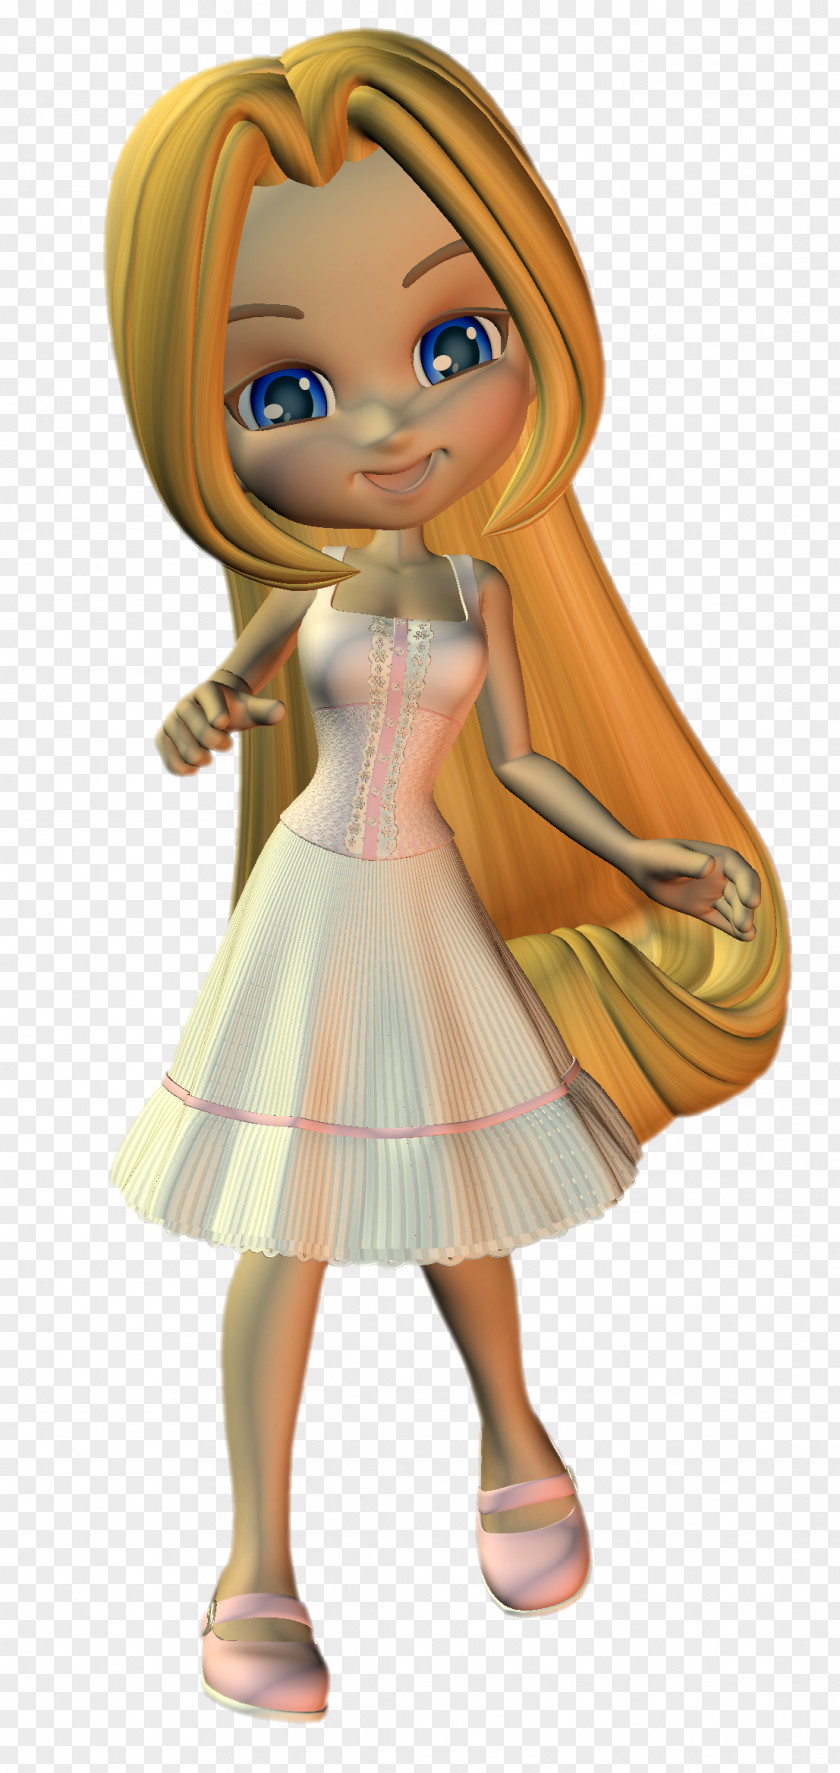 Doll Barbie Puppet Costume PNG